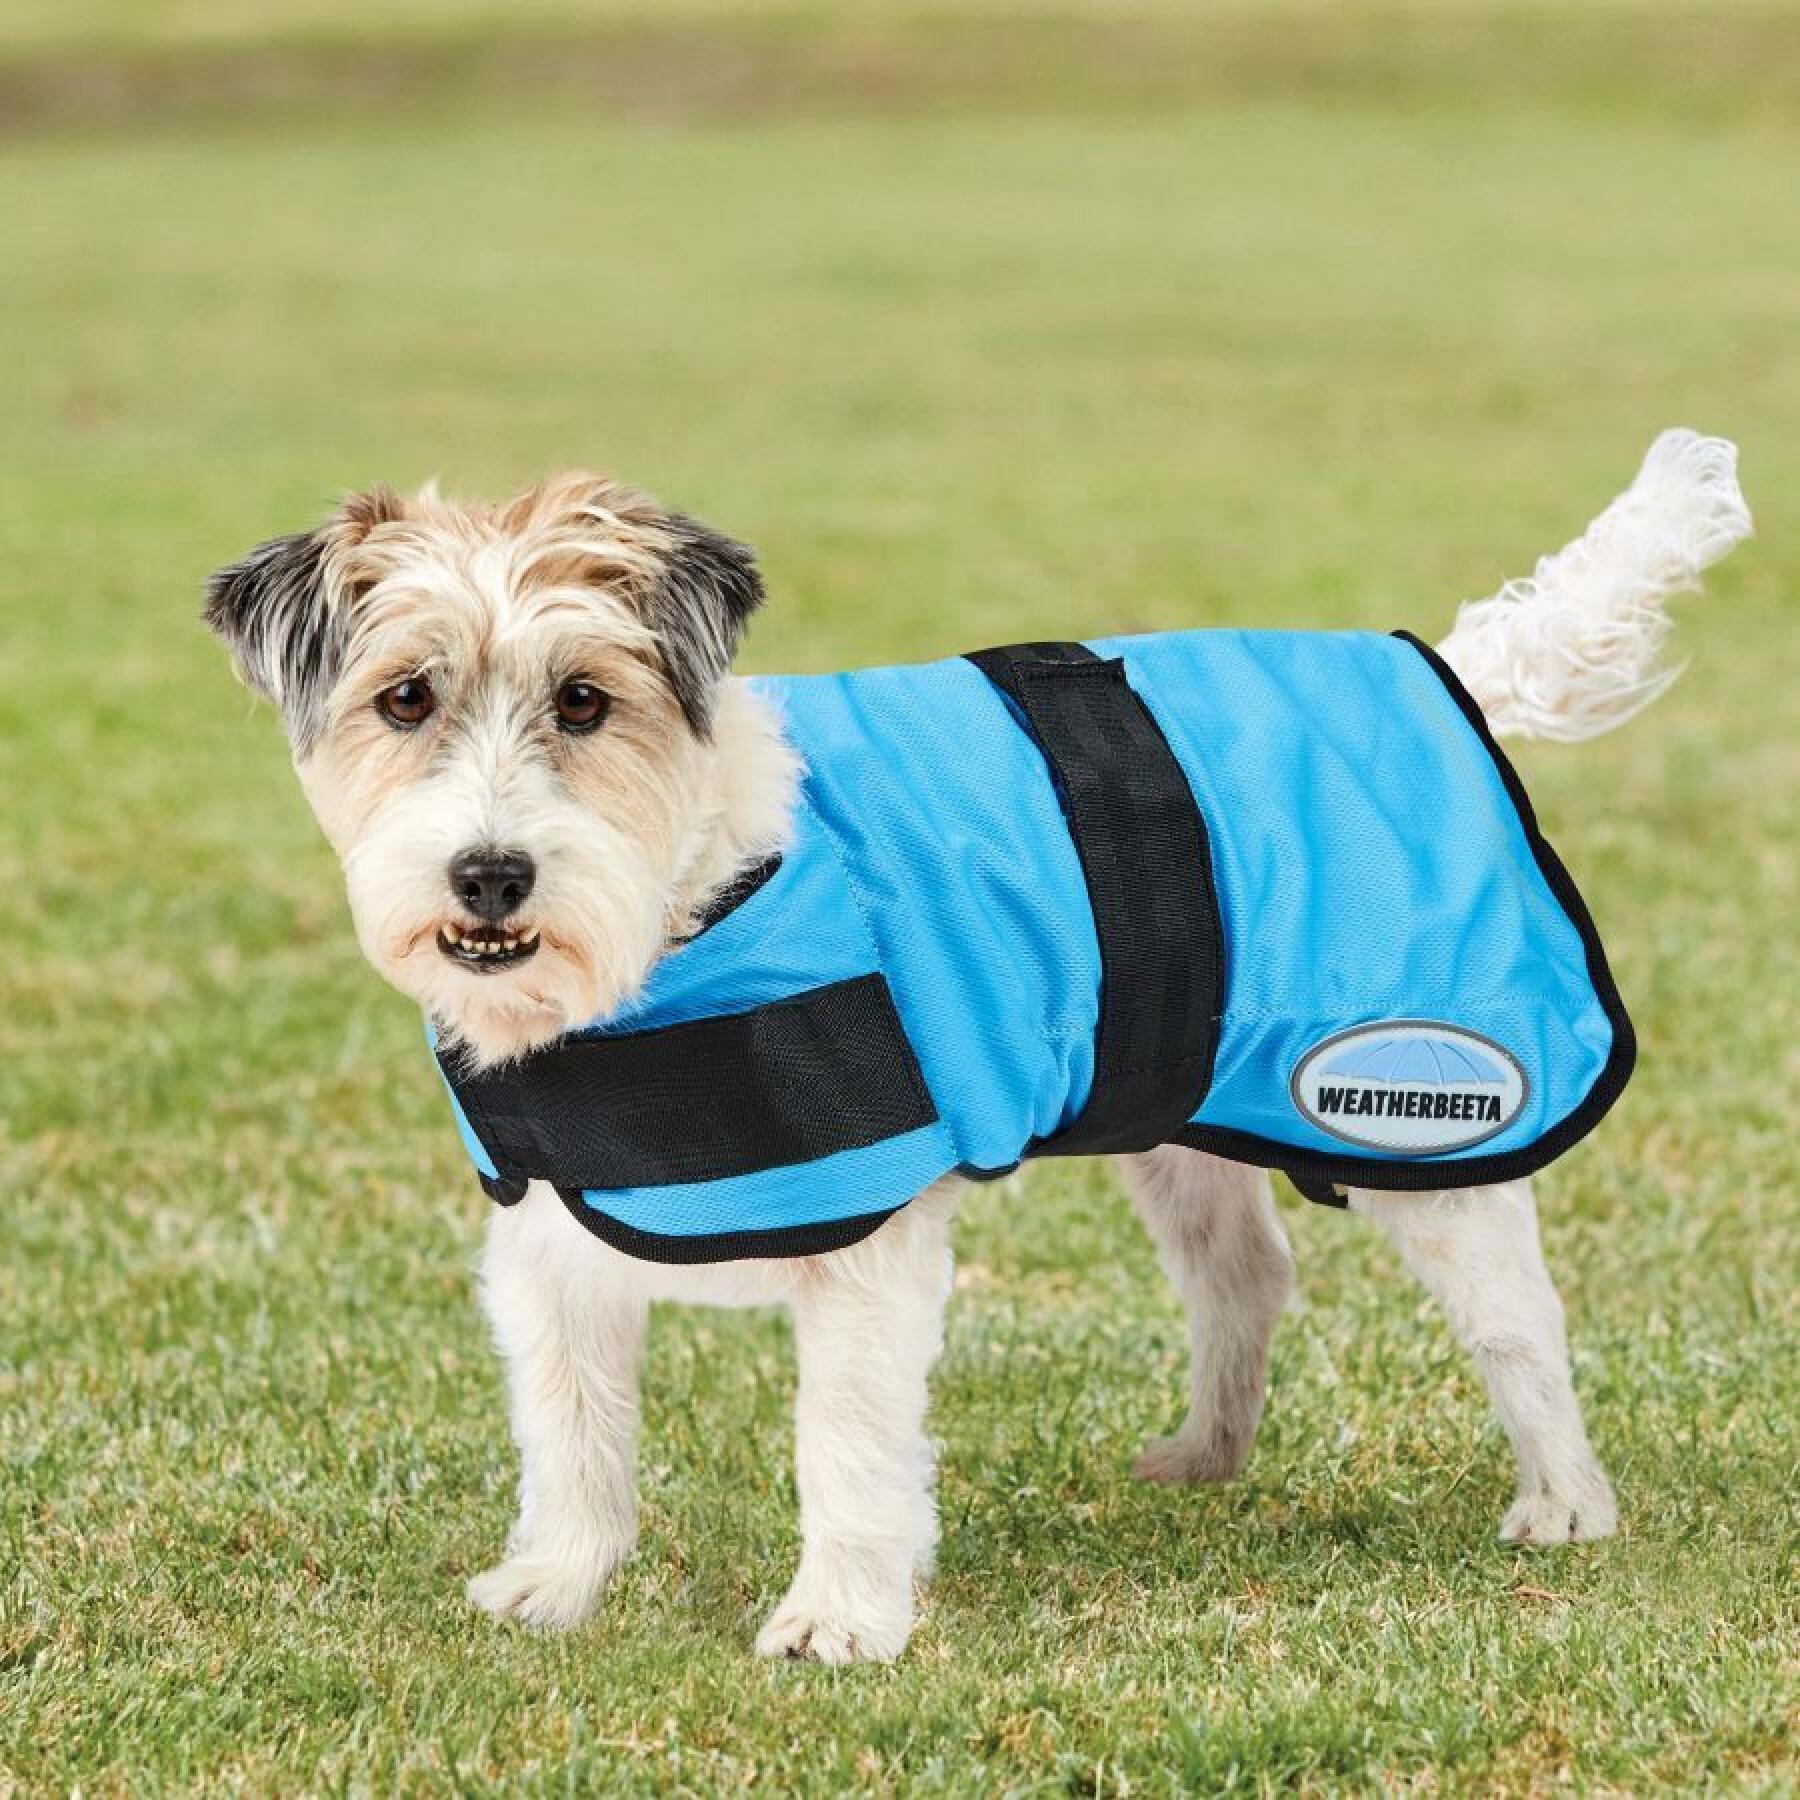 Cooling coat for dogs Weatherbeeta Therapy-Tec